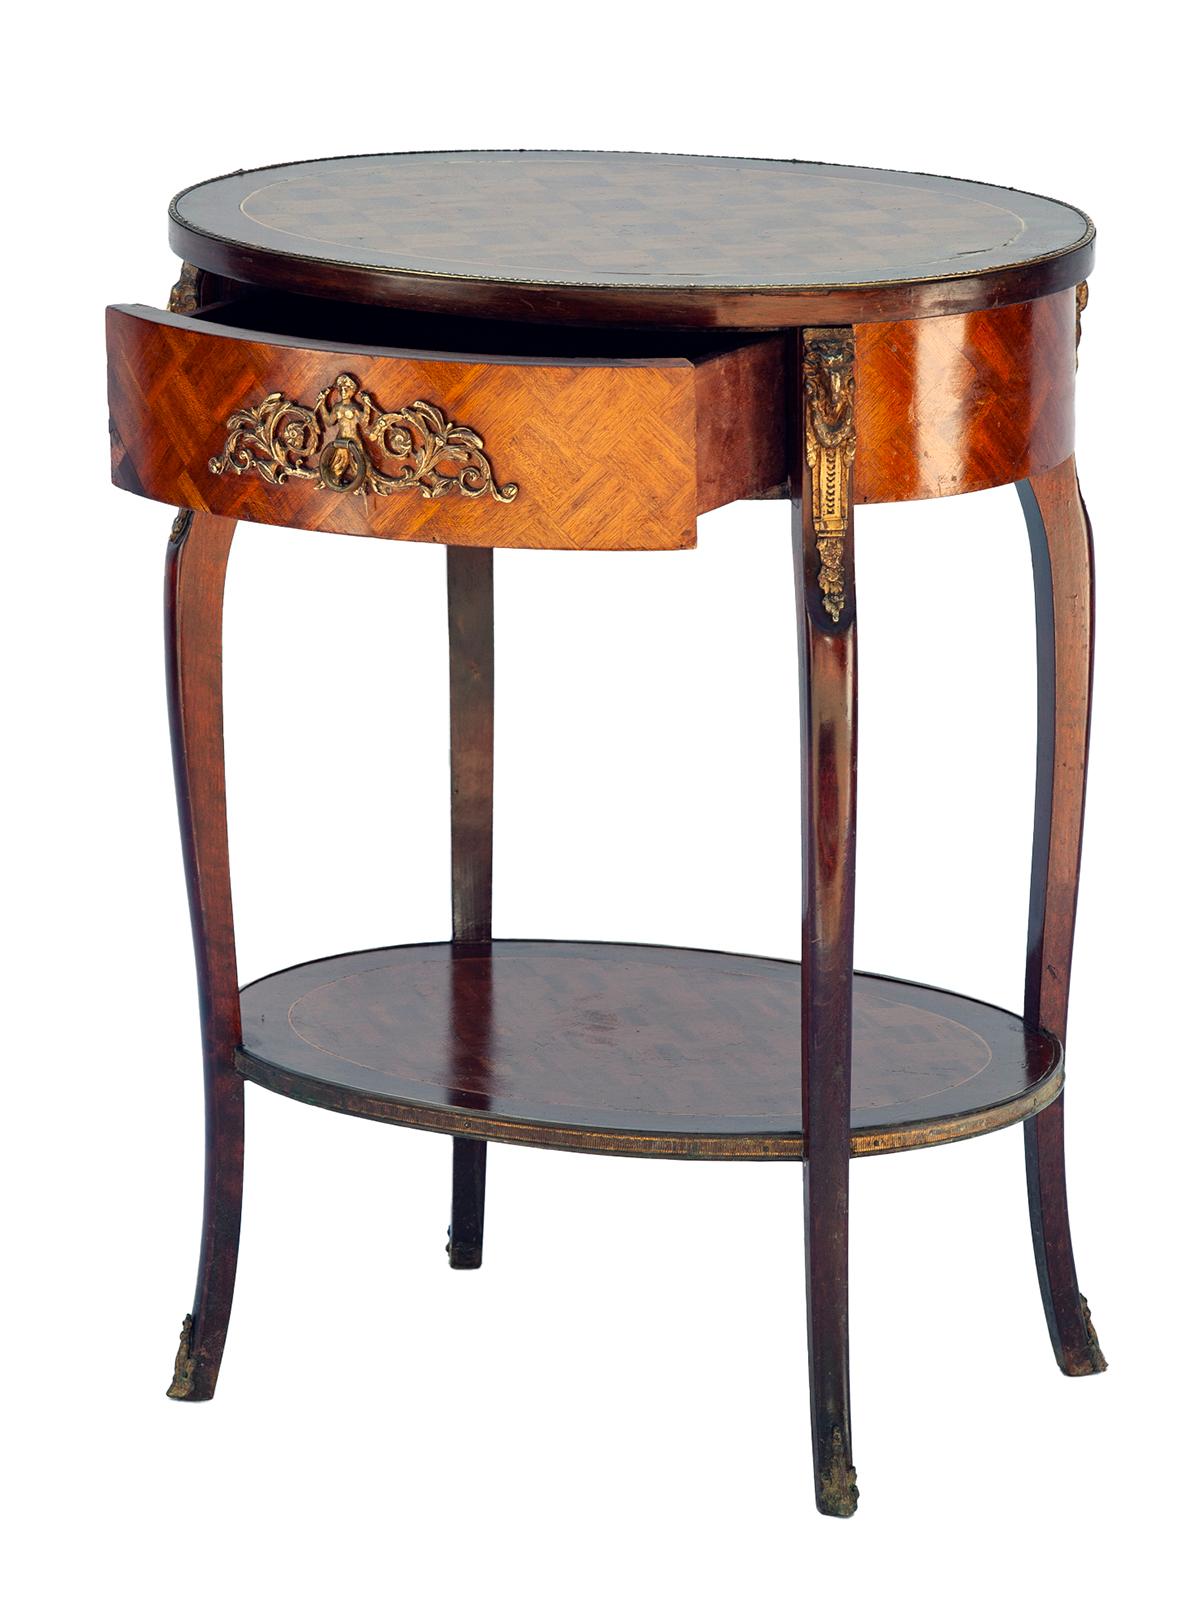 Louis XV French lamp or occasional table, made from mahogany & other veneers with nice mounts and a single drawer in the front.  This table is in very good condition having been refreshed, the surface has been polished, 

Restoration and Damage